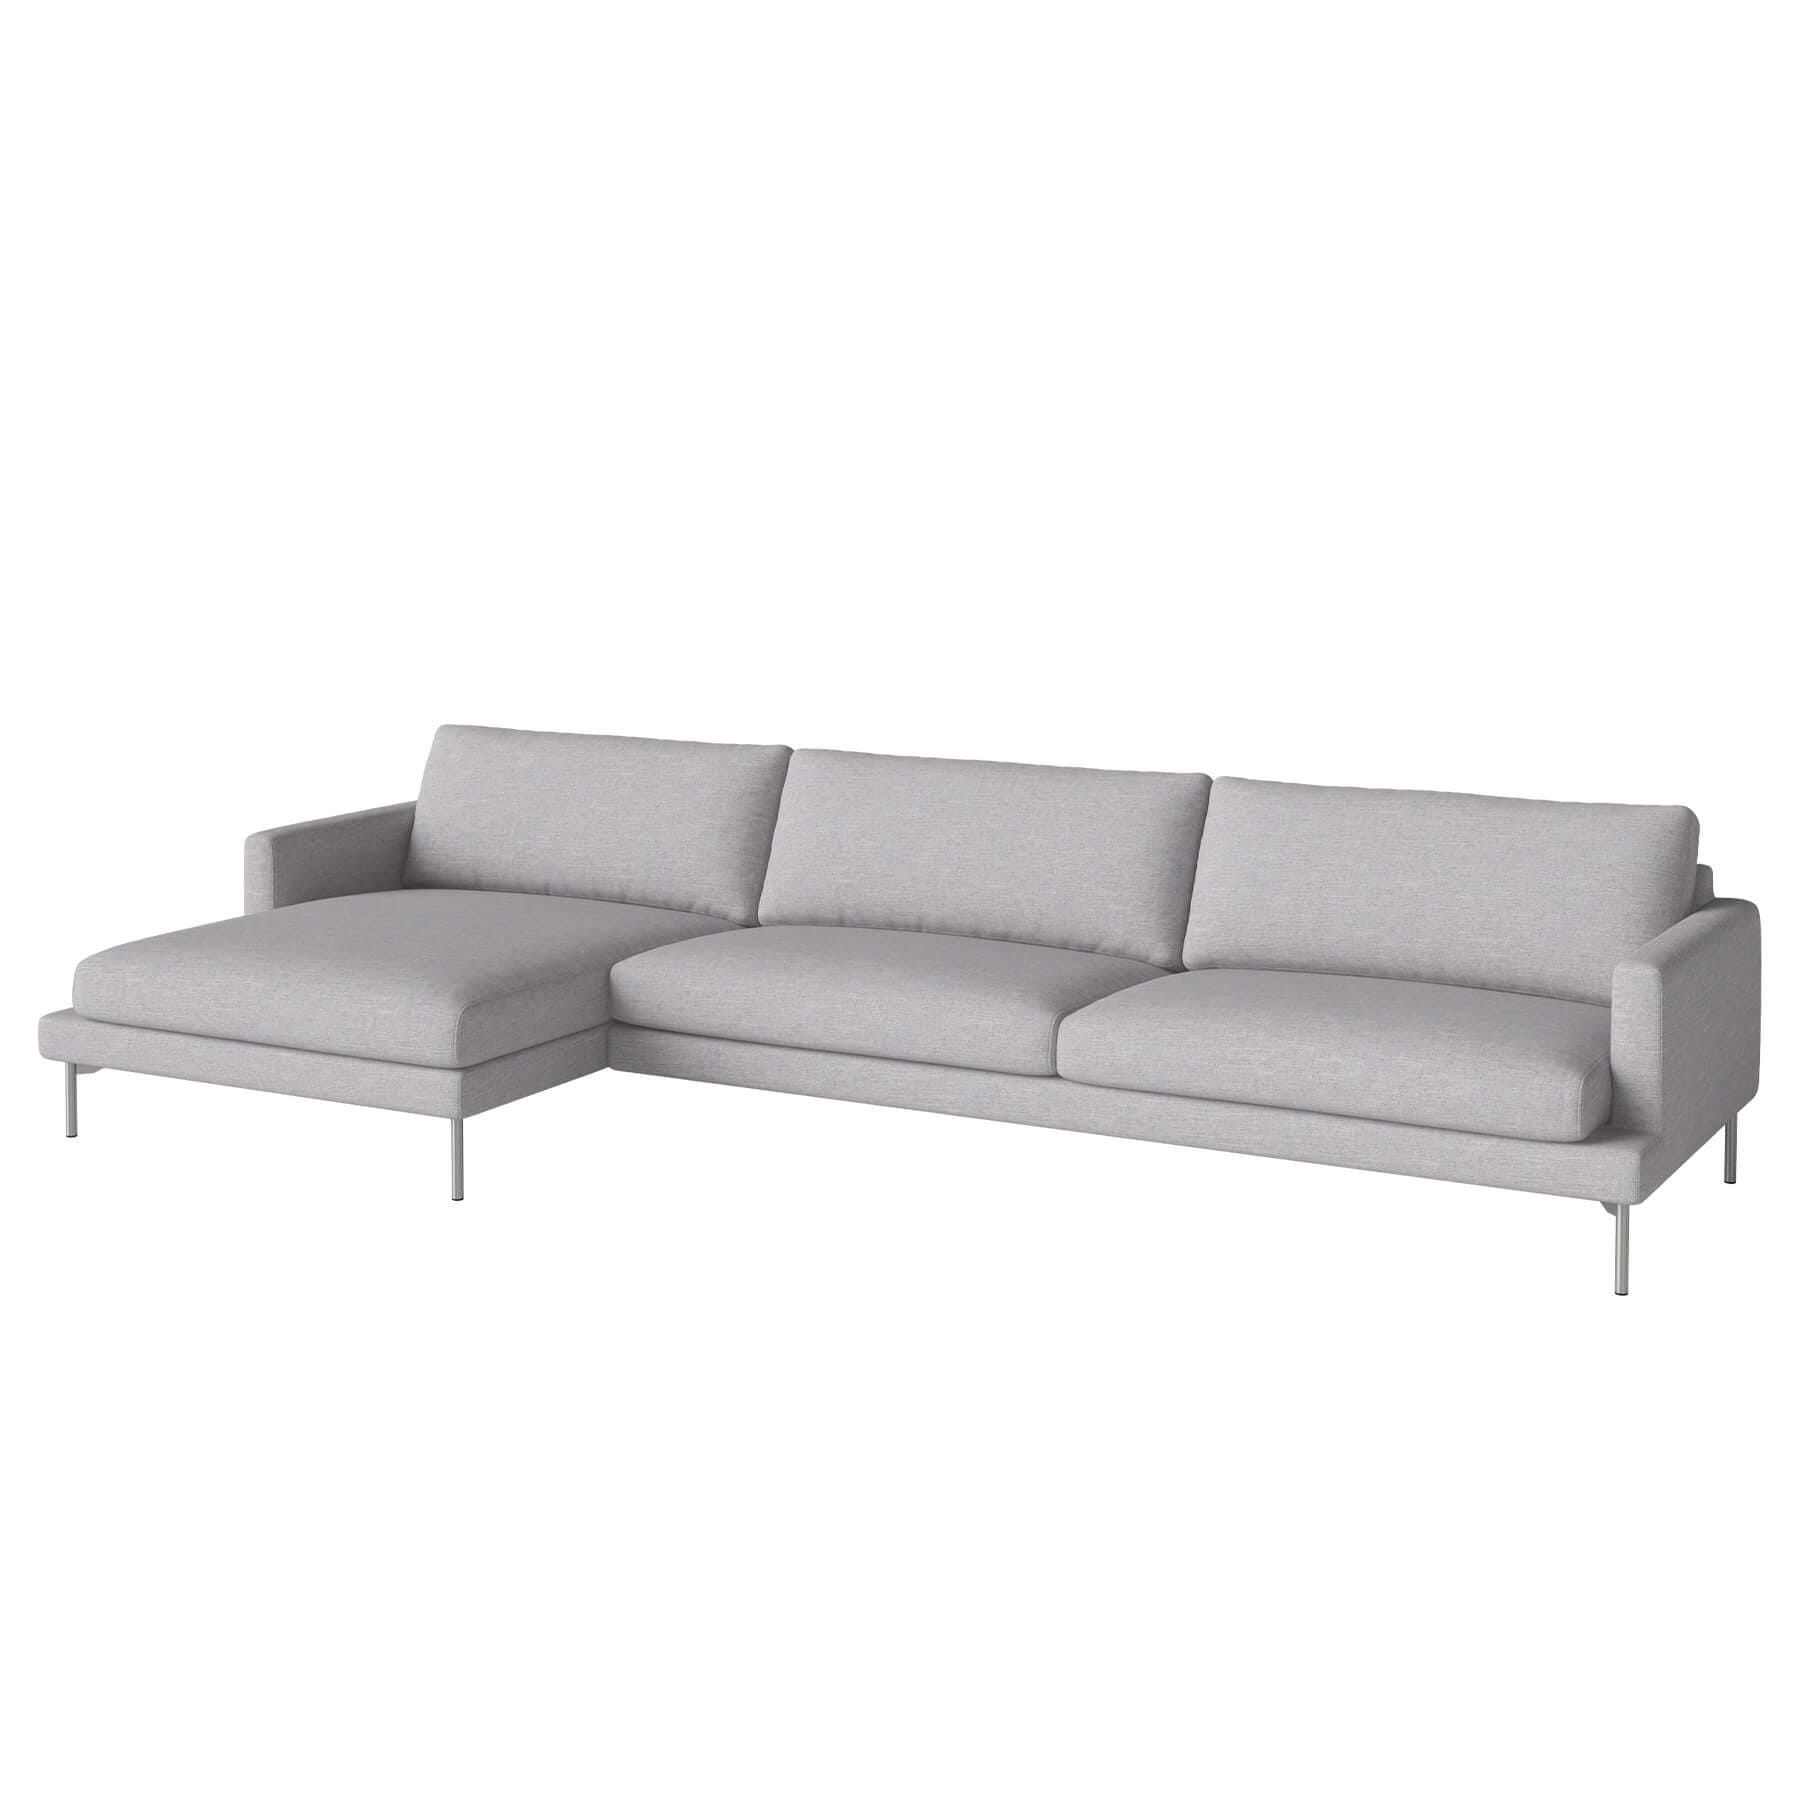 Bolia Veneda Sofa 45 Seater Sofa With Chaise Longue Brushed Steel Baize Light Grey Left Grey Designer Furniture From Holloways Of Ludlow